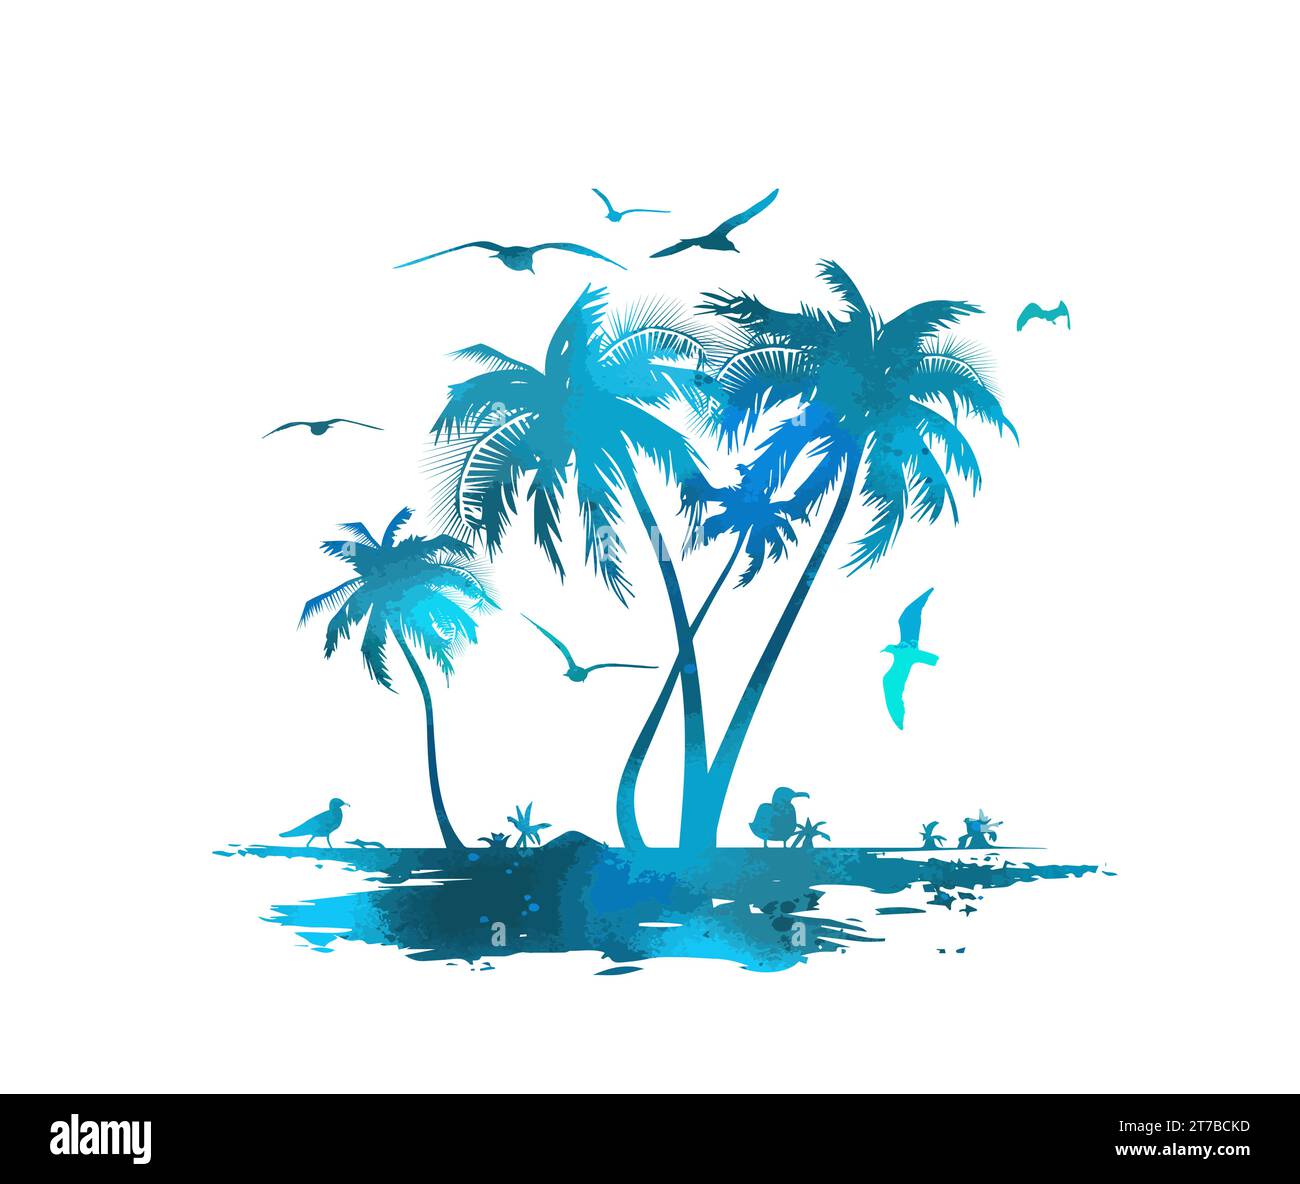 Silhouette of a blue palm tree on a white background with seagulls ...